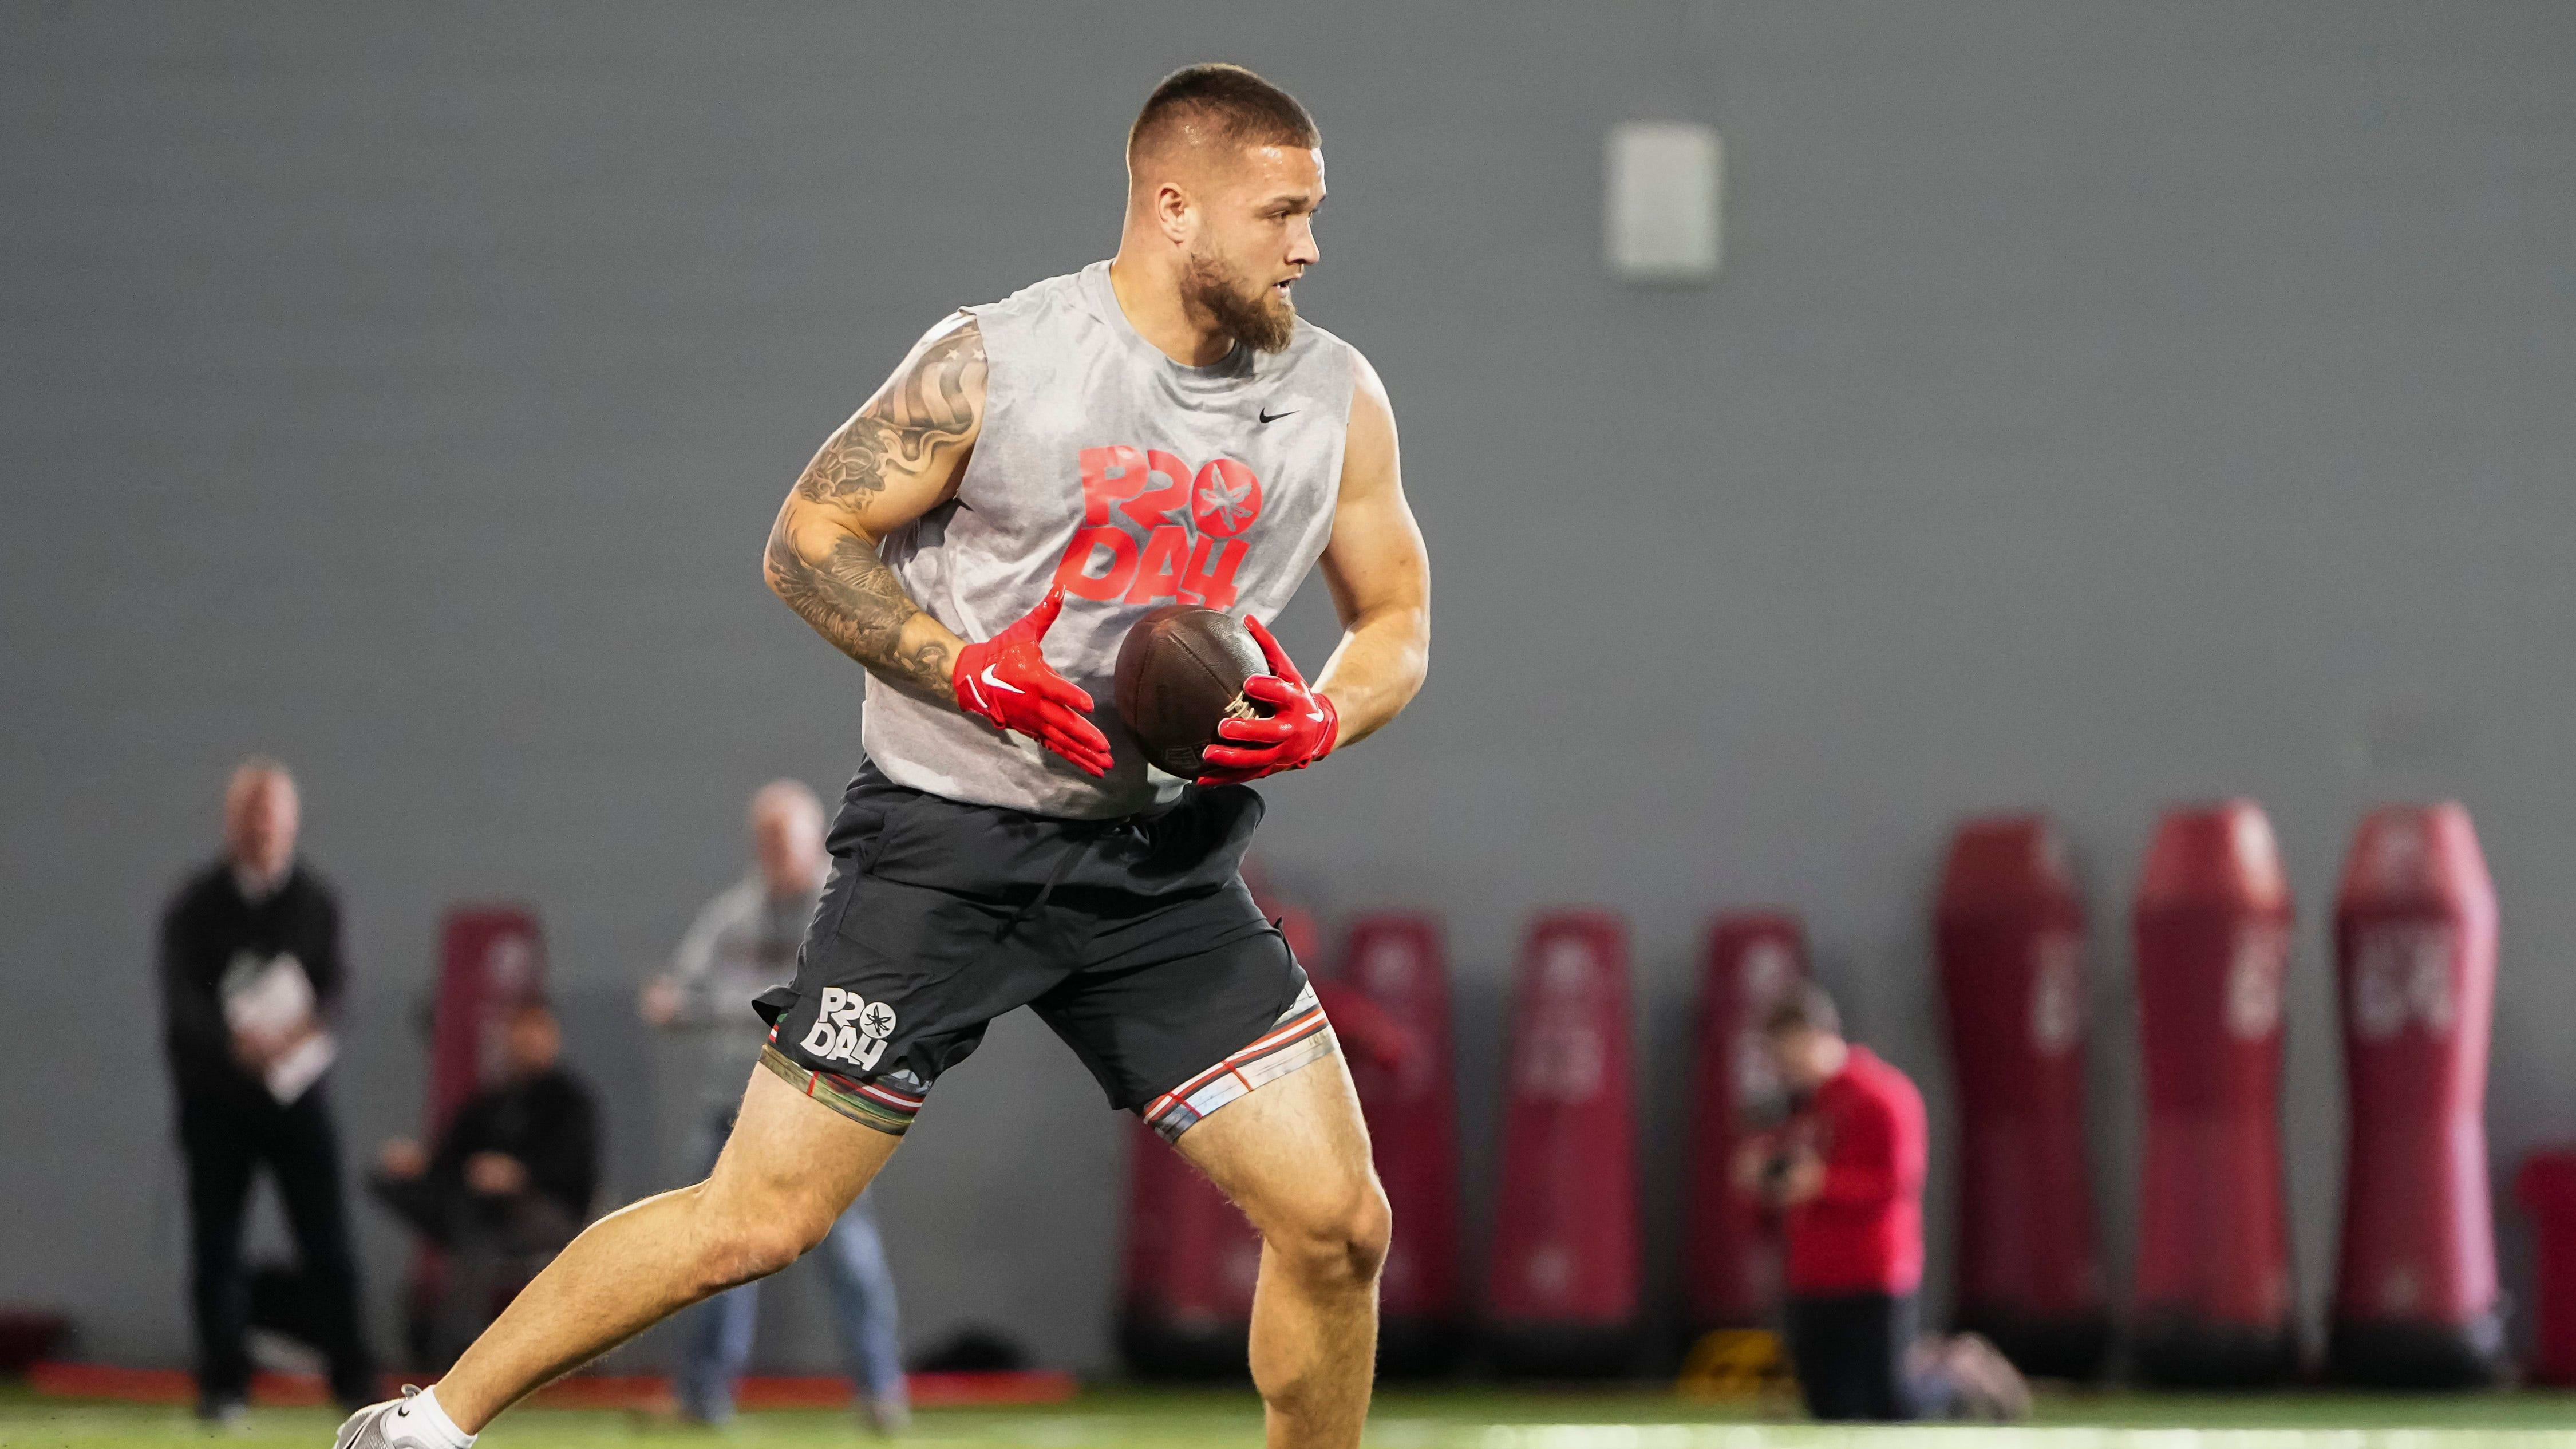 Ohio State Buckeyes tight end Cade Stover catches a pass during his Pro Day.